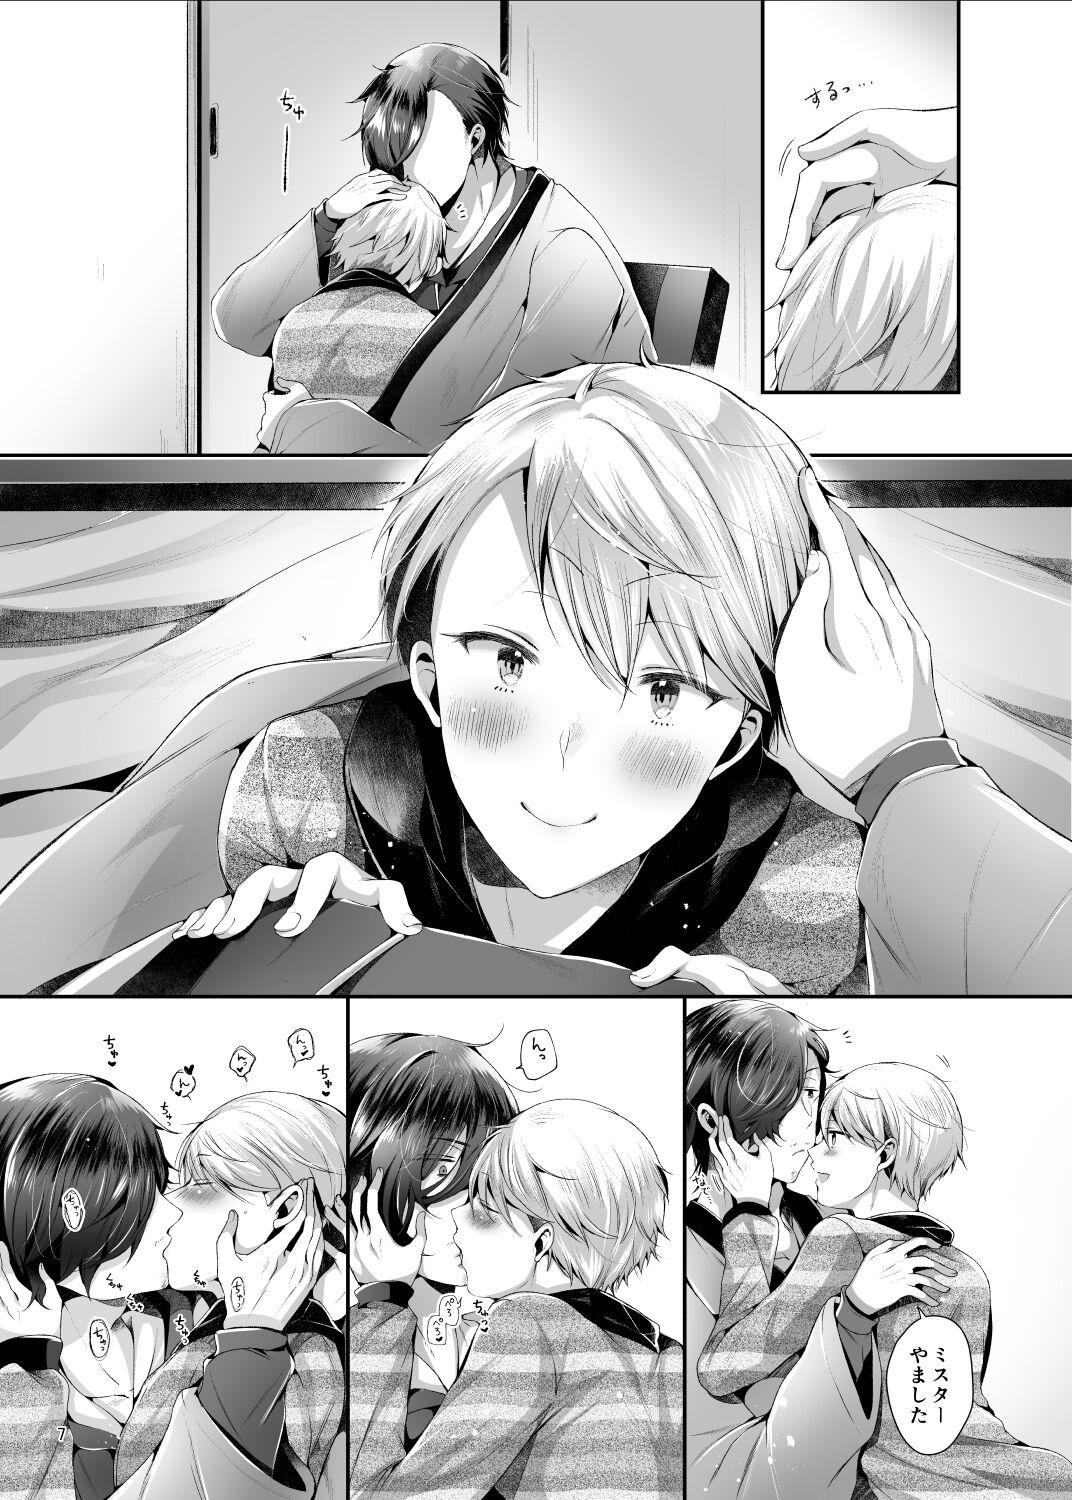 Spank Relax at home - The idolmaster sidem Muscles - Page 8